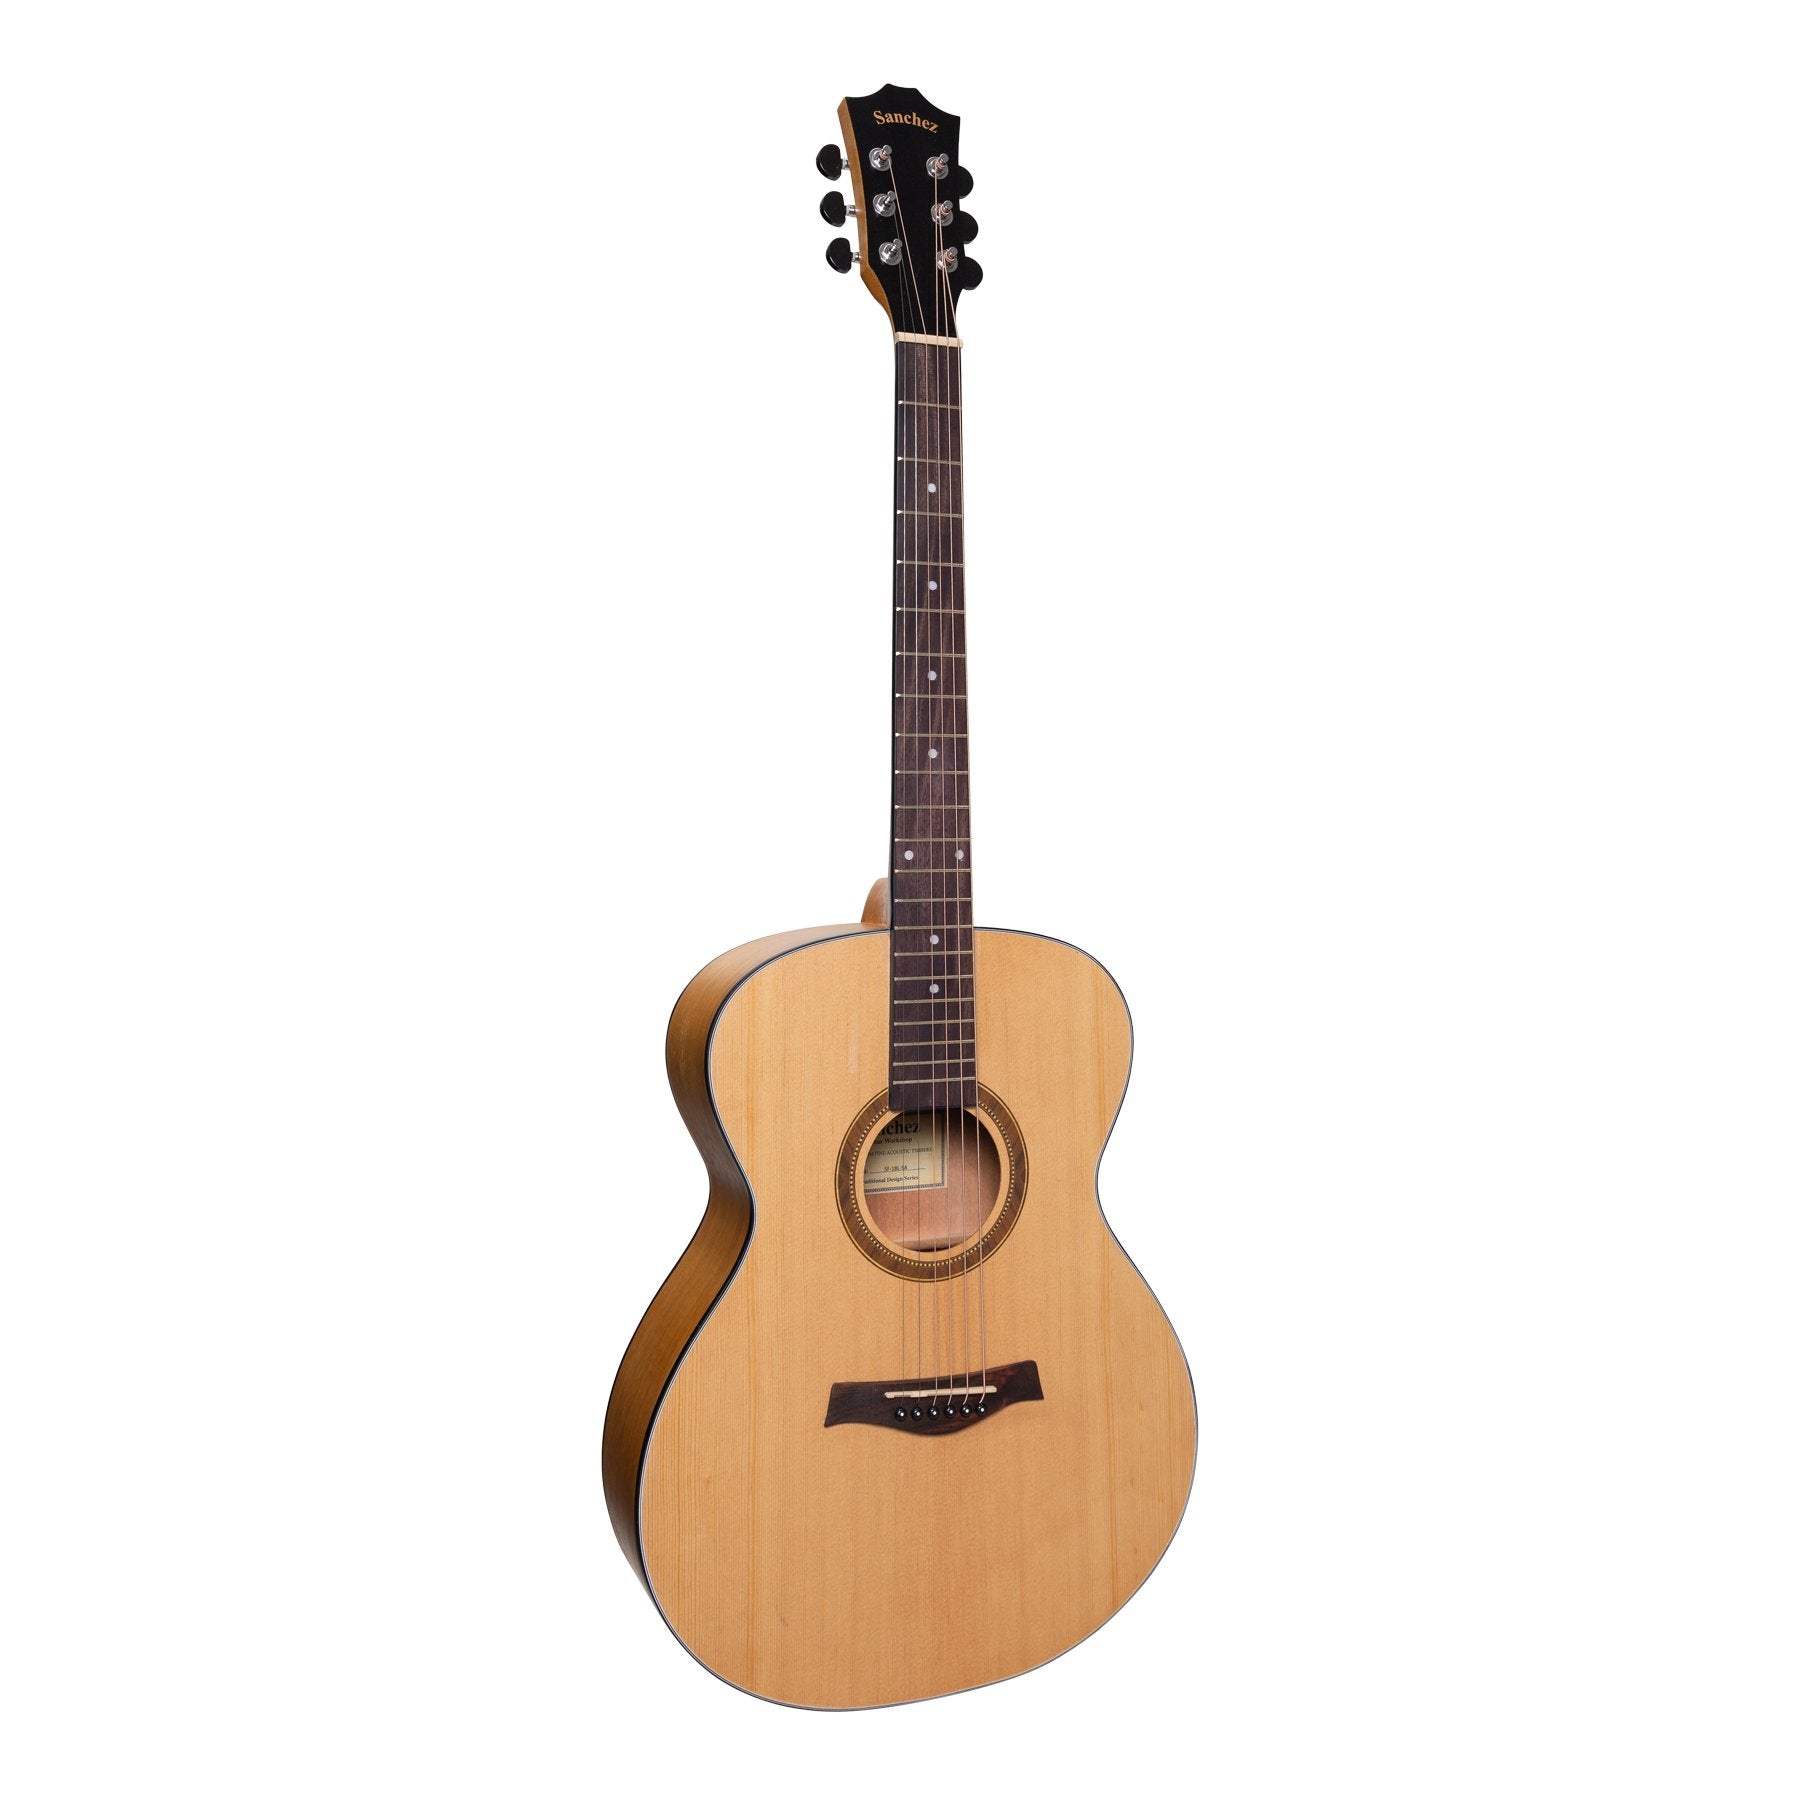 Sanchez Left Handed Acoustic Small Body Guitar (Spruce/Acacia)-SF-18L-SA